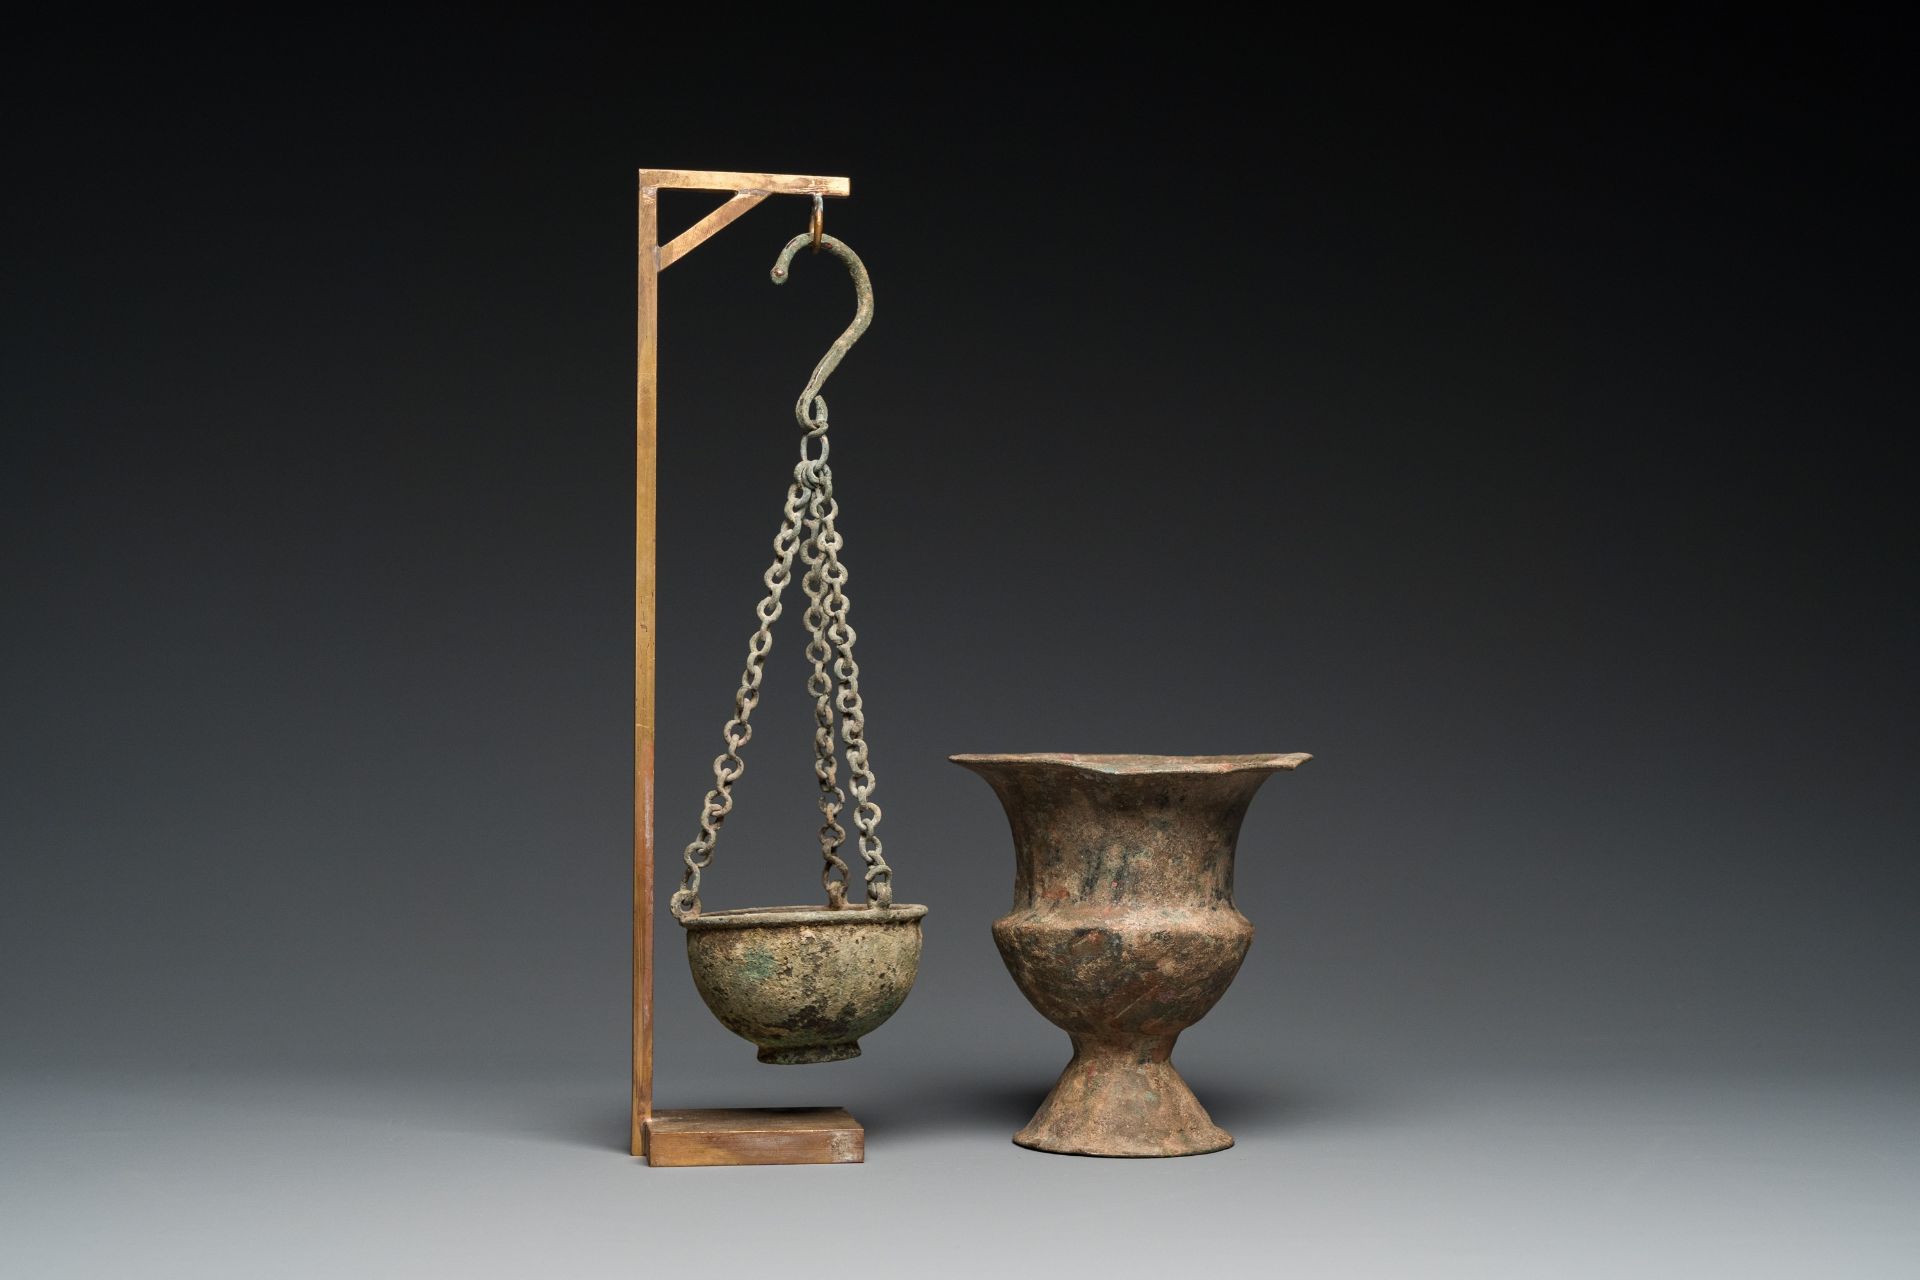 A Byzantine or Roman bronze vase and a hanging incense burner, 5/7th C. - Image 3 of 9